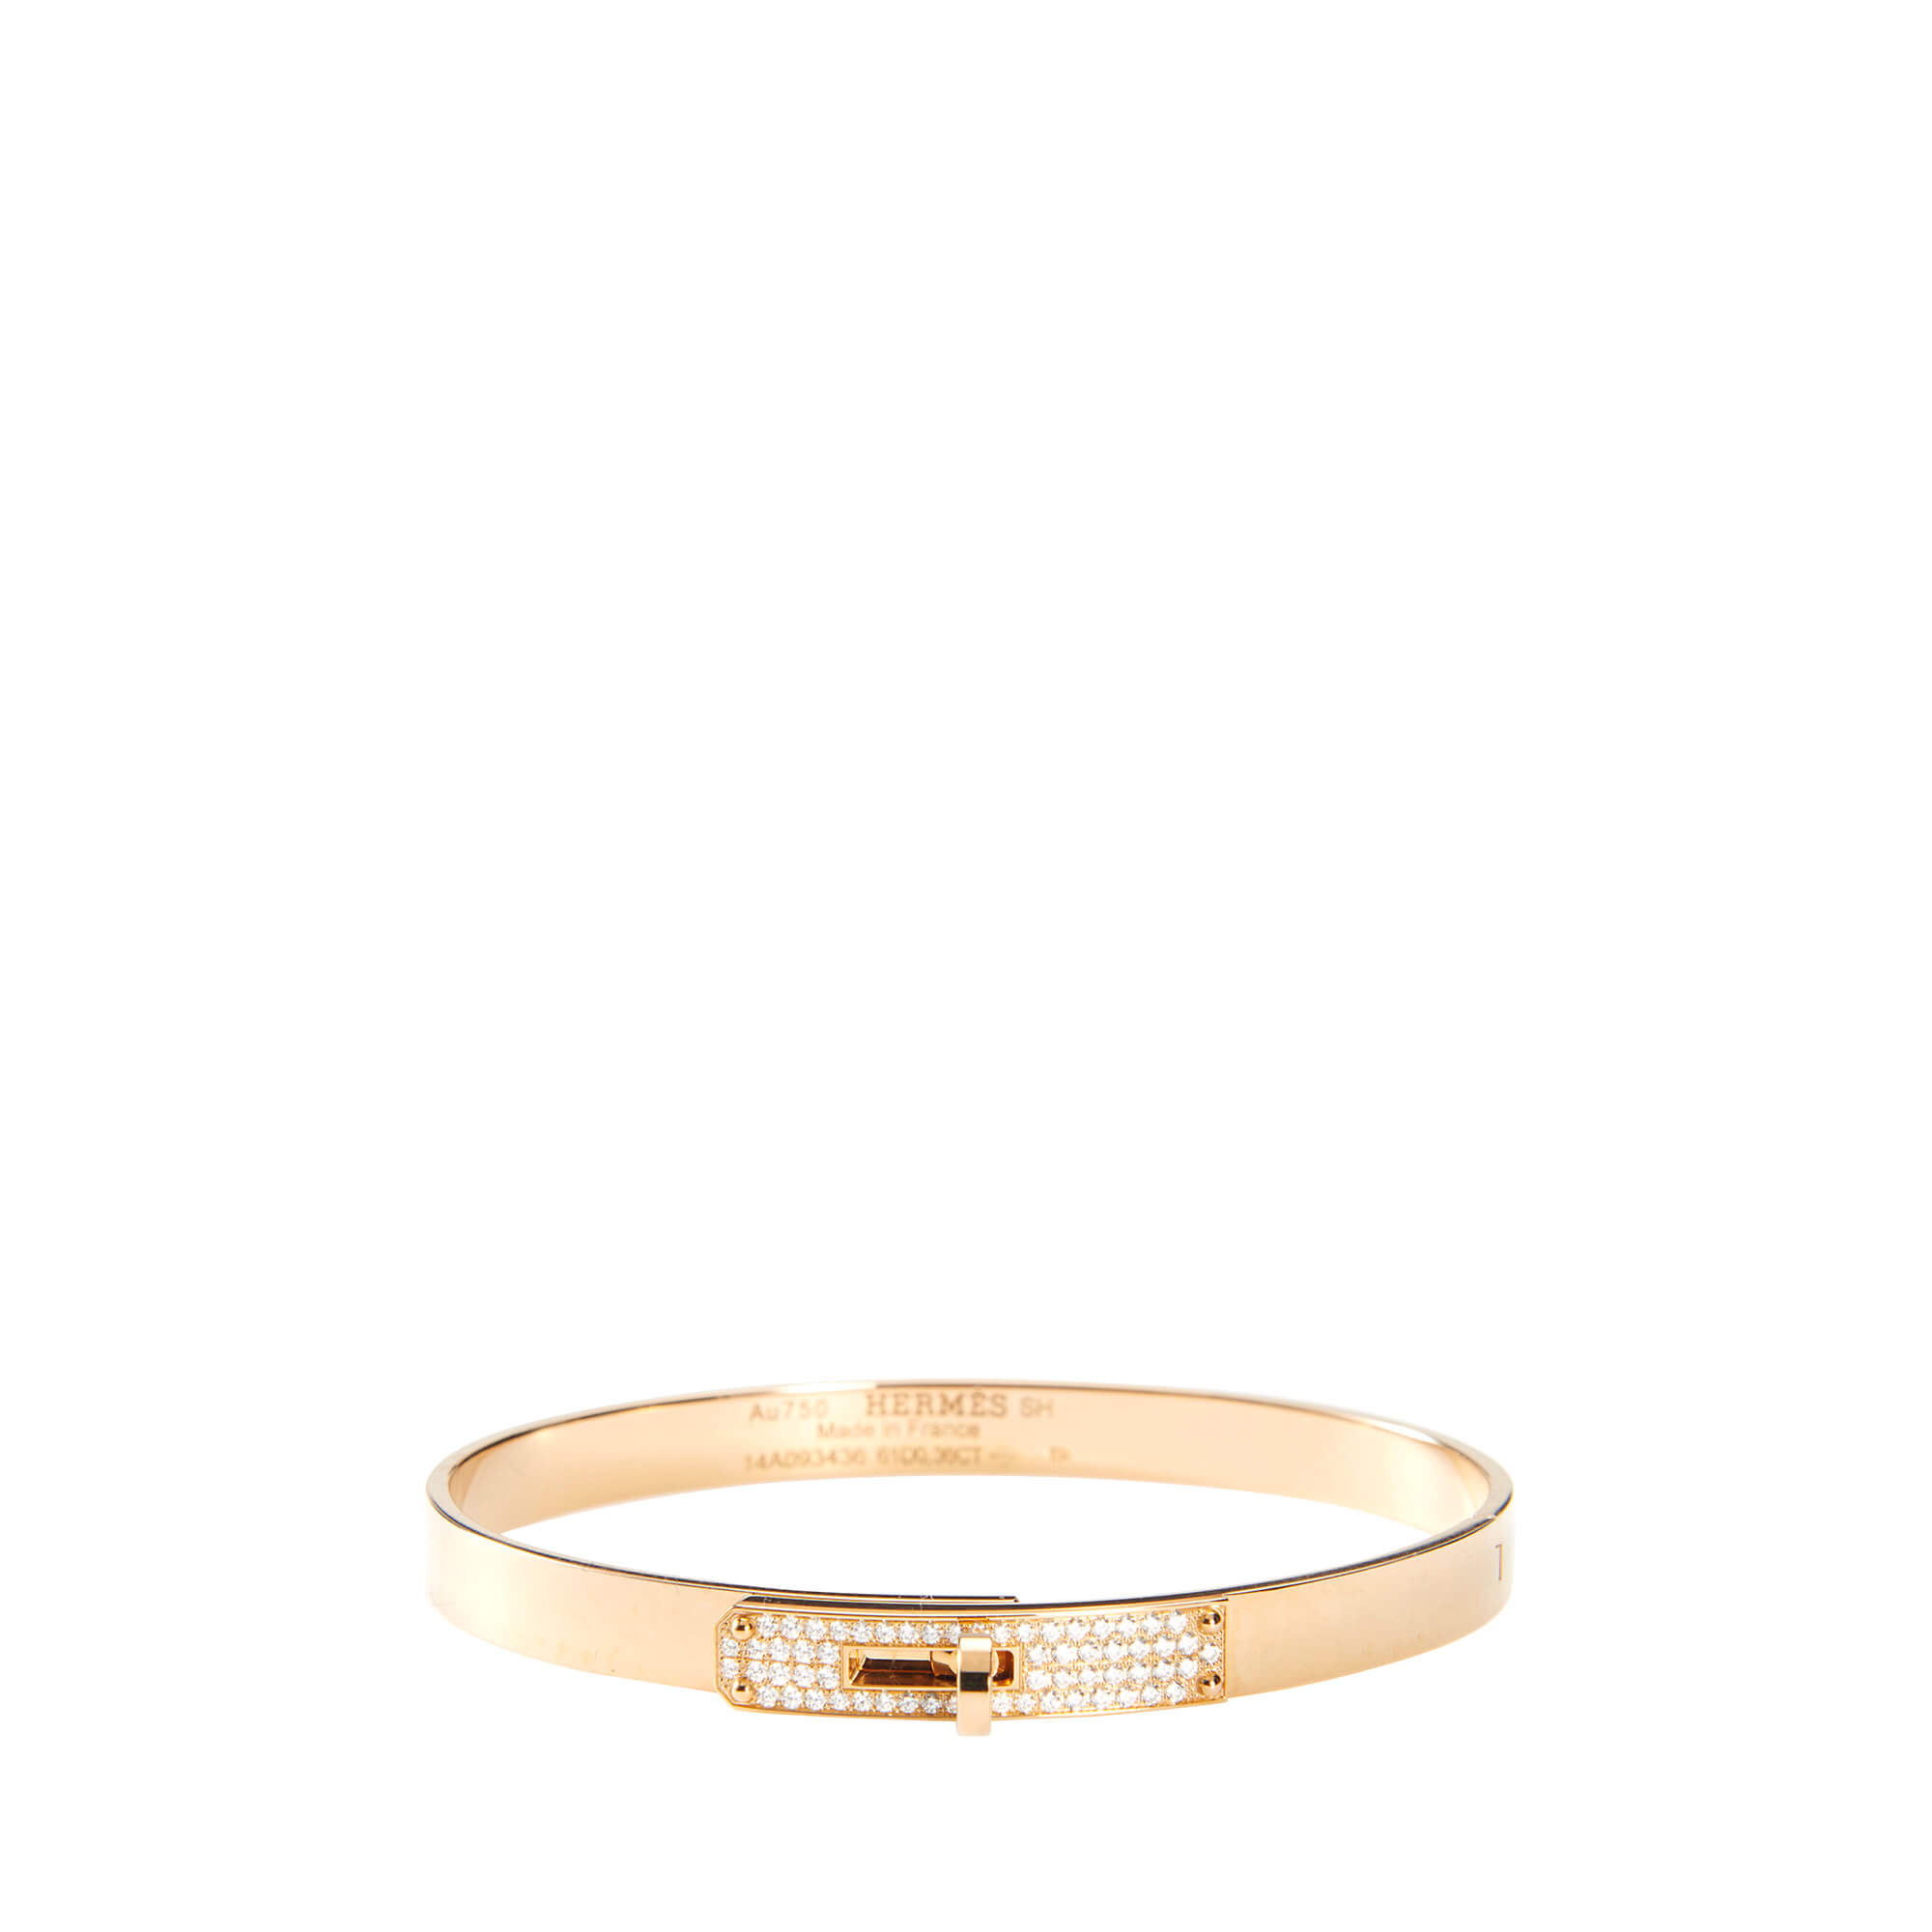 Authentic Hermes Kelly Bracelet in Gold | The Ornamental